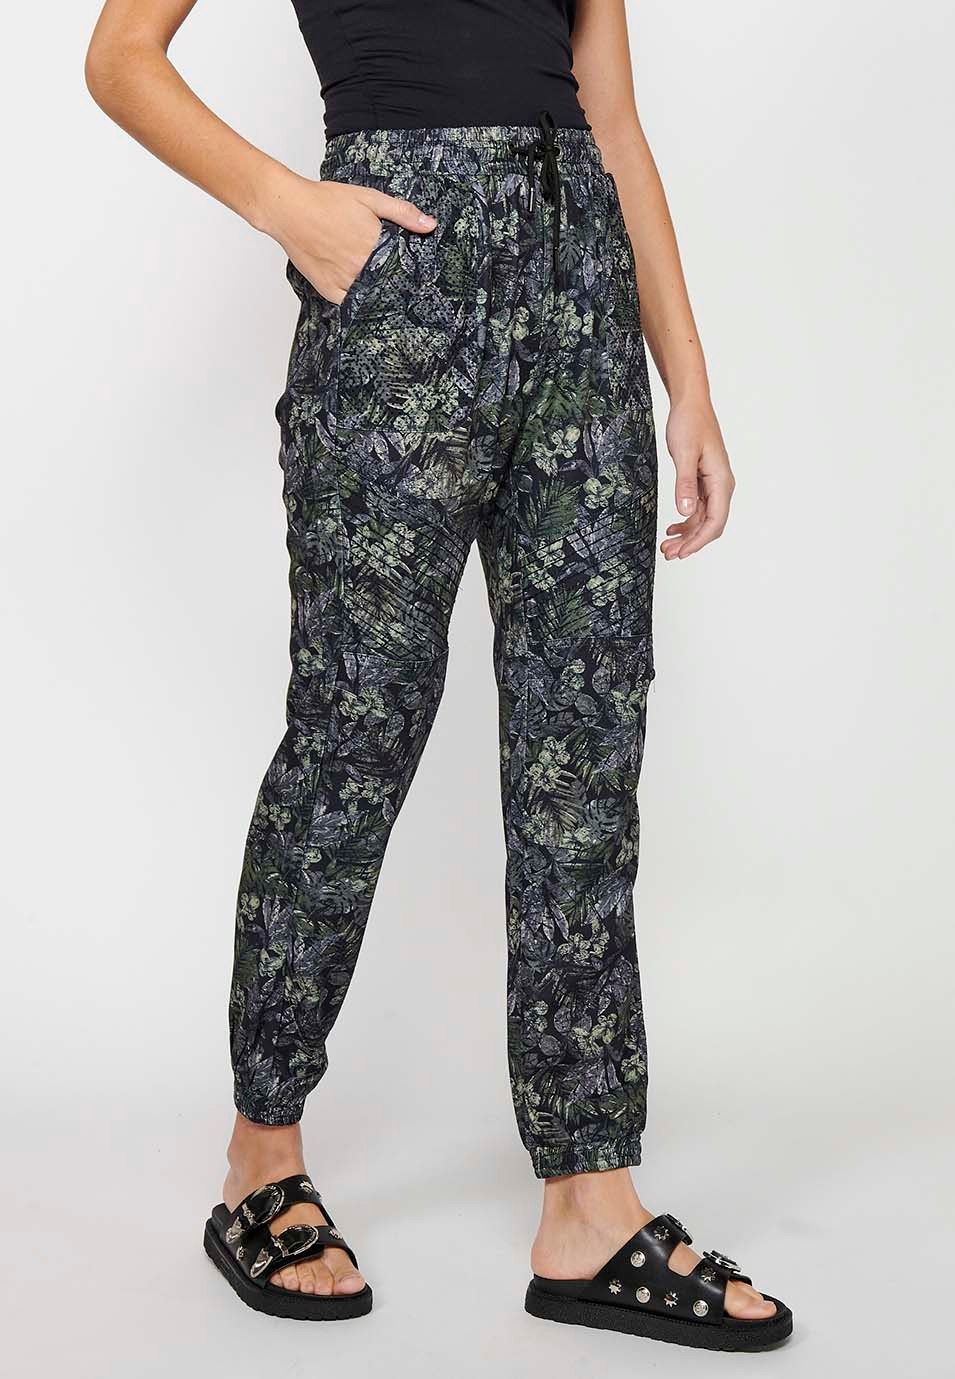 Long jogging pants fitted at the ankles with elasticated waistband with drawstring and Khaki floral print for Women 2